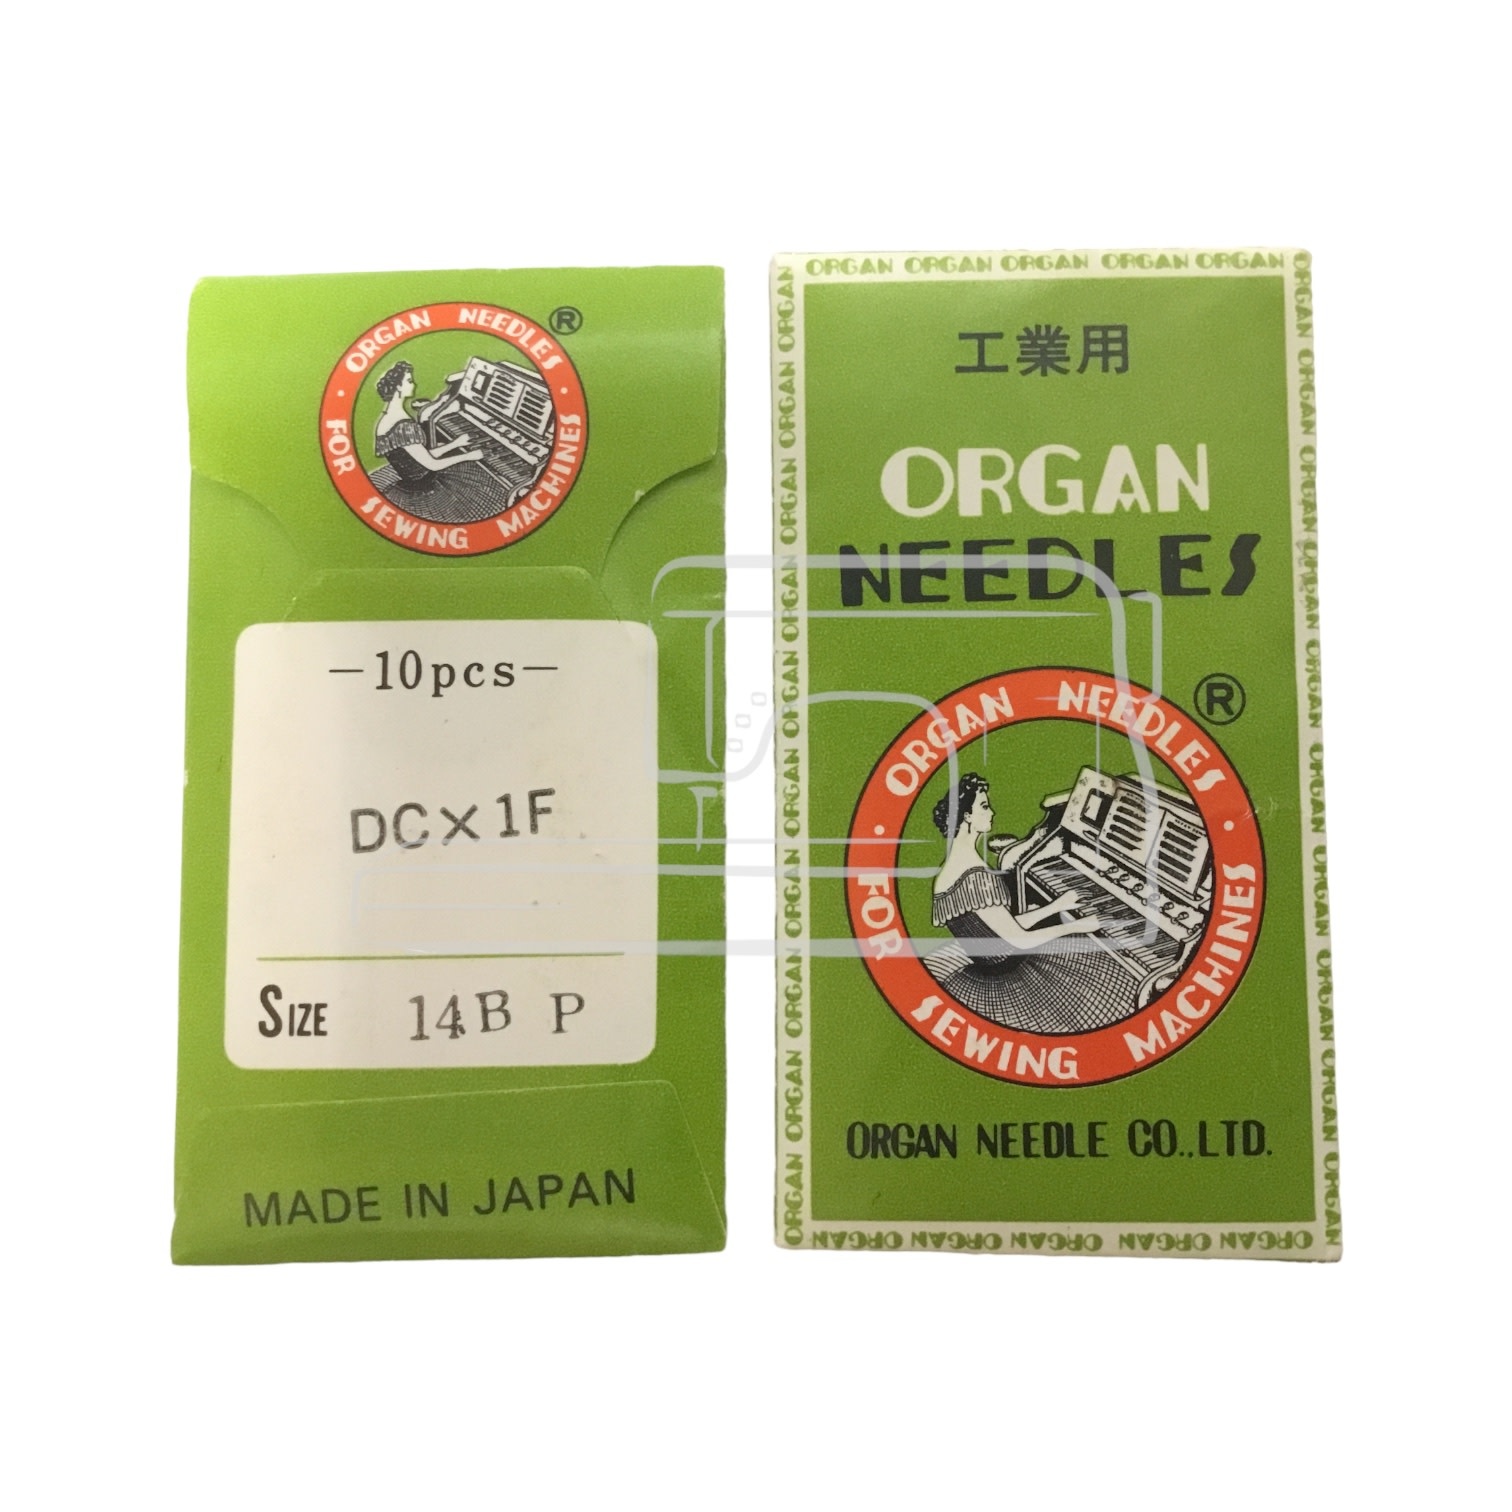 Organ Industrial needle DCX1F size 14 ball point